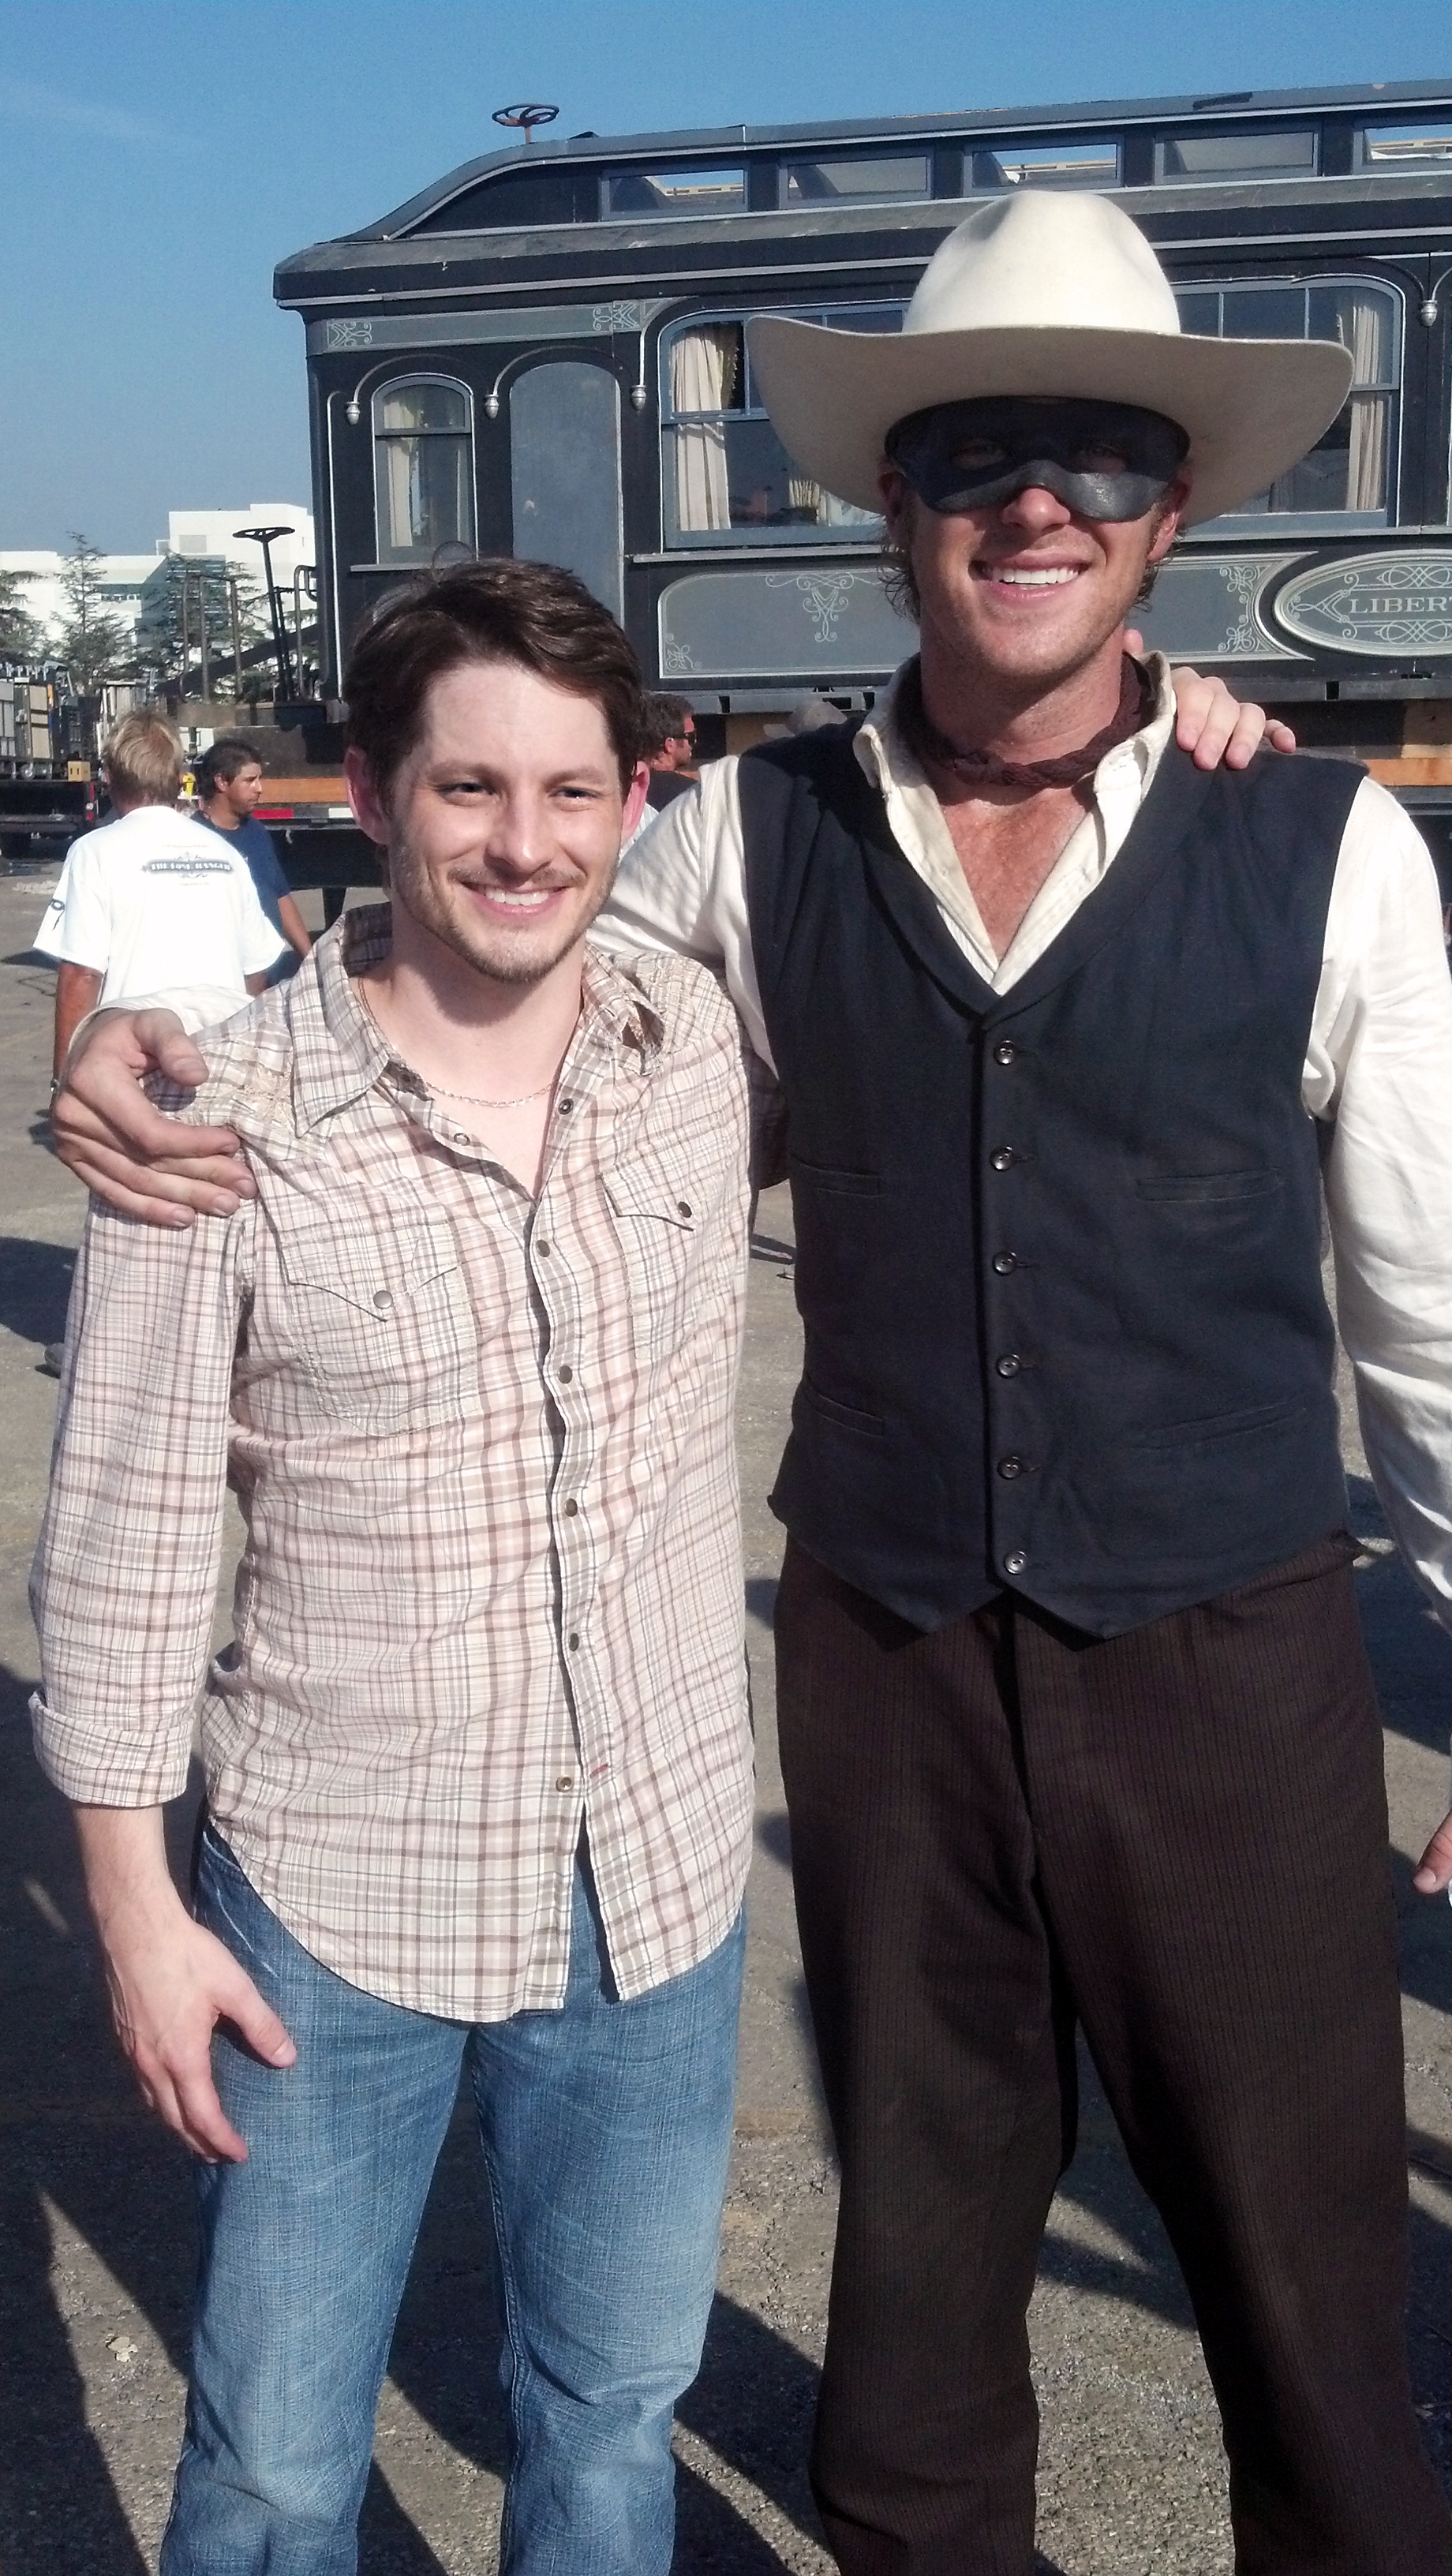 Stephen Brodie and Armie Hammer on set of Disney's The Lone Ranger